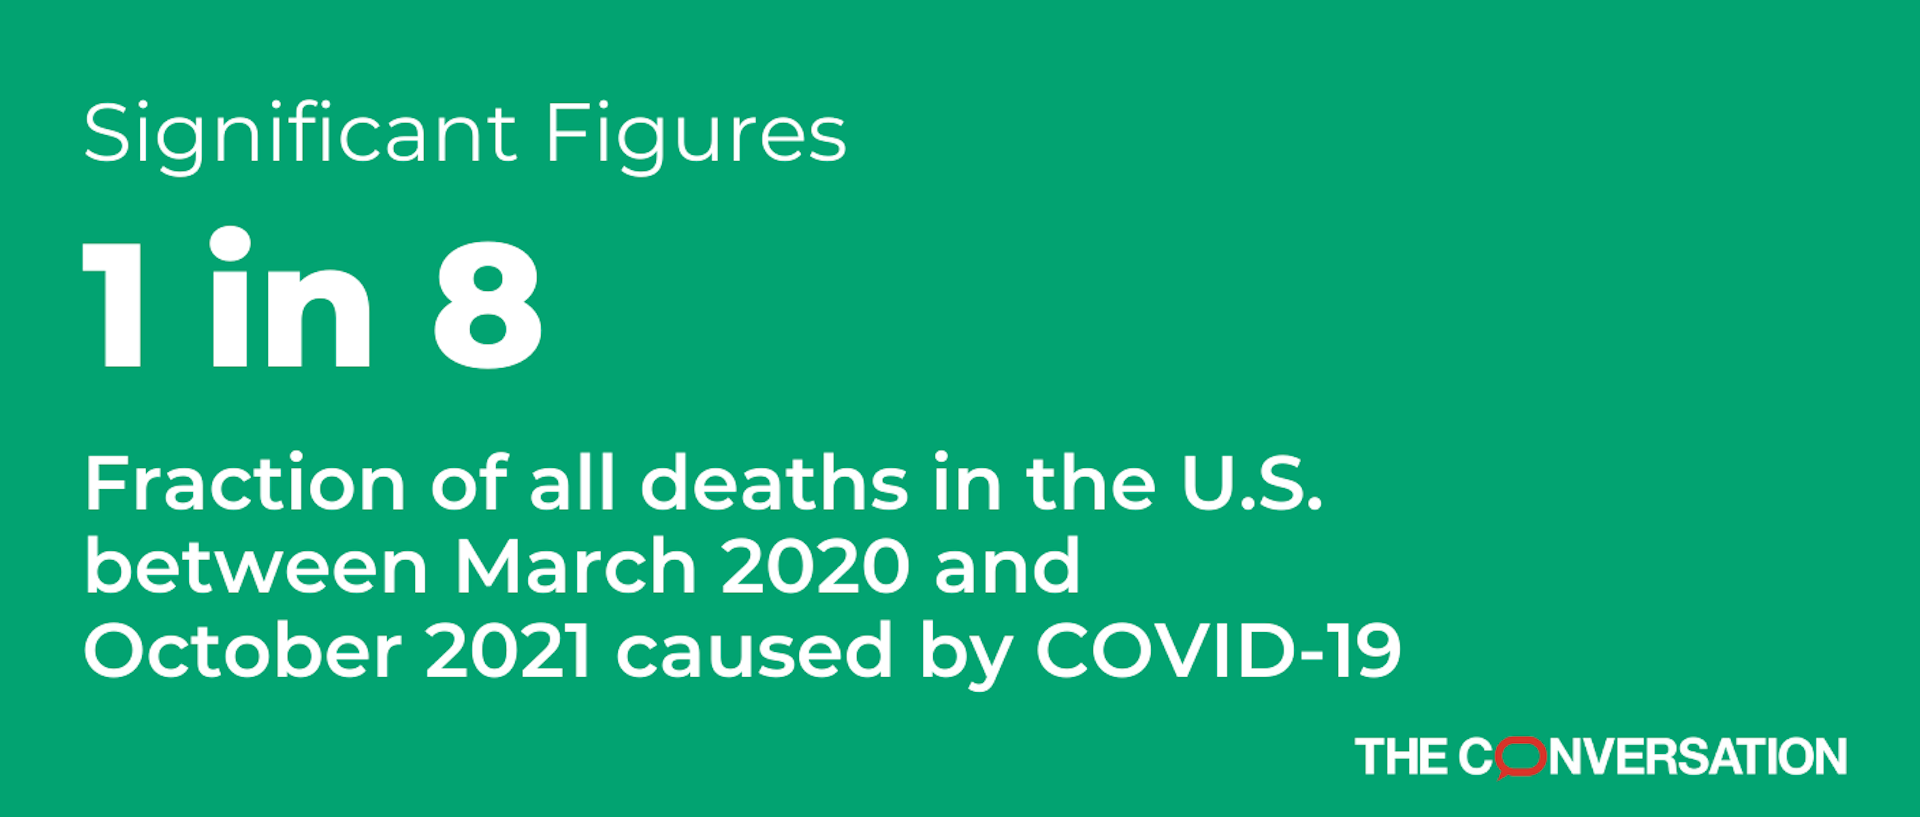 Significant Figures 1 in 8 Fraction of all deaths in the U.S. between March 2020 and October 2021 caused by COVID-19 THE CONVERSATION